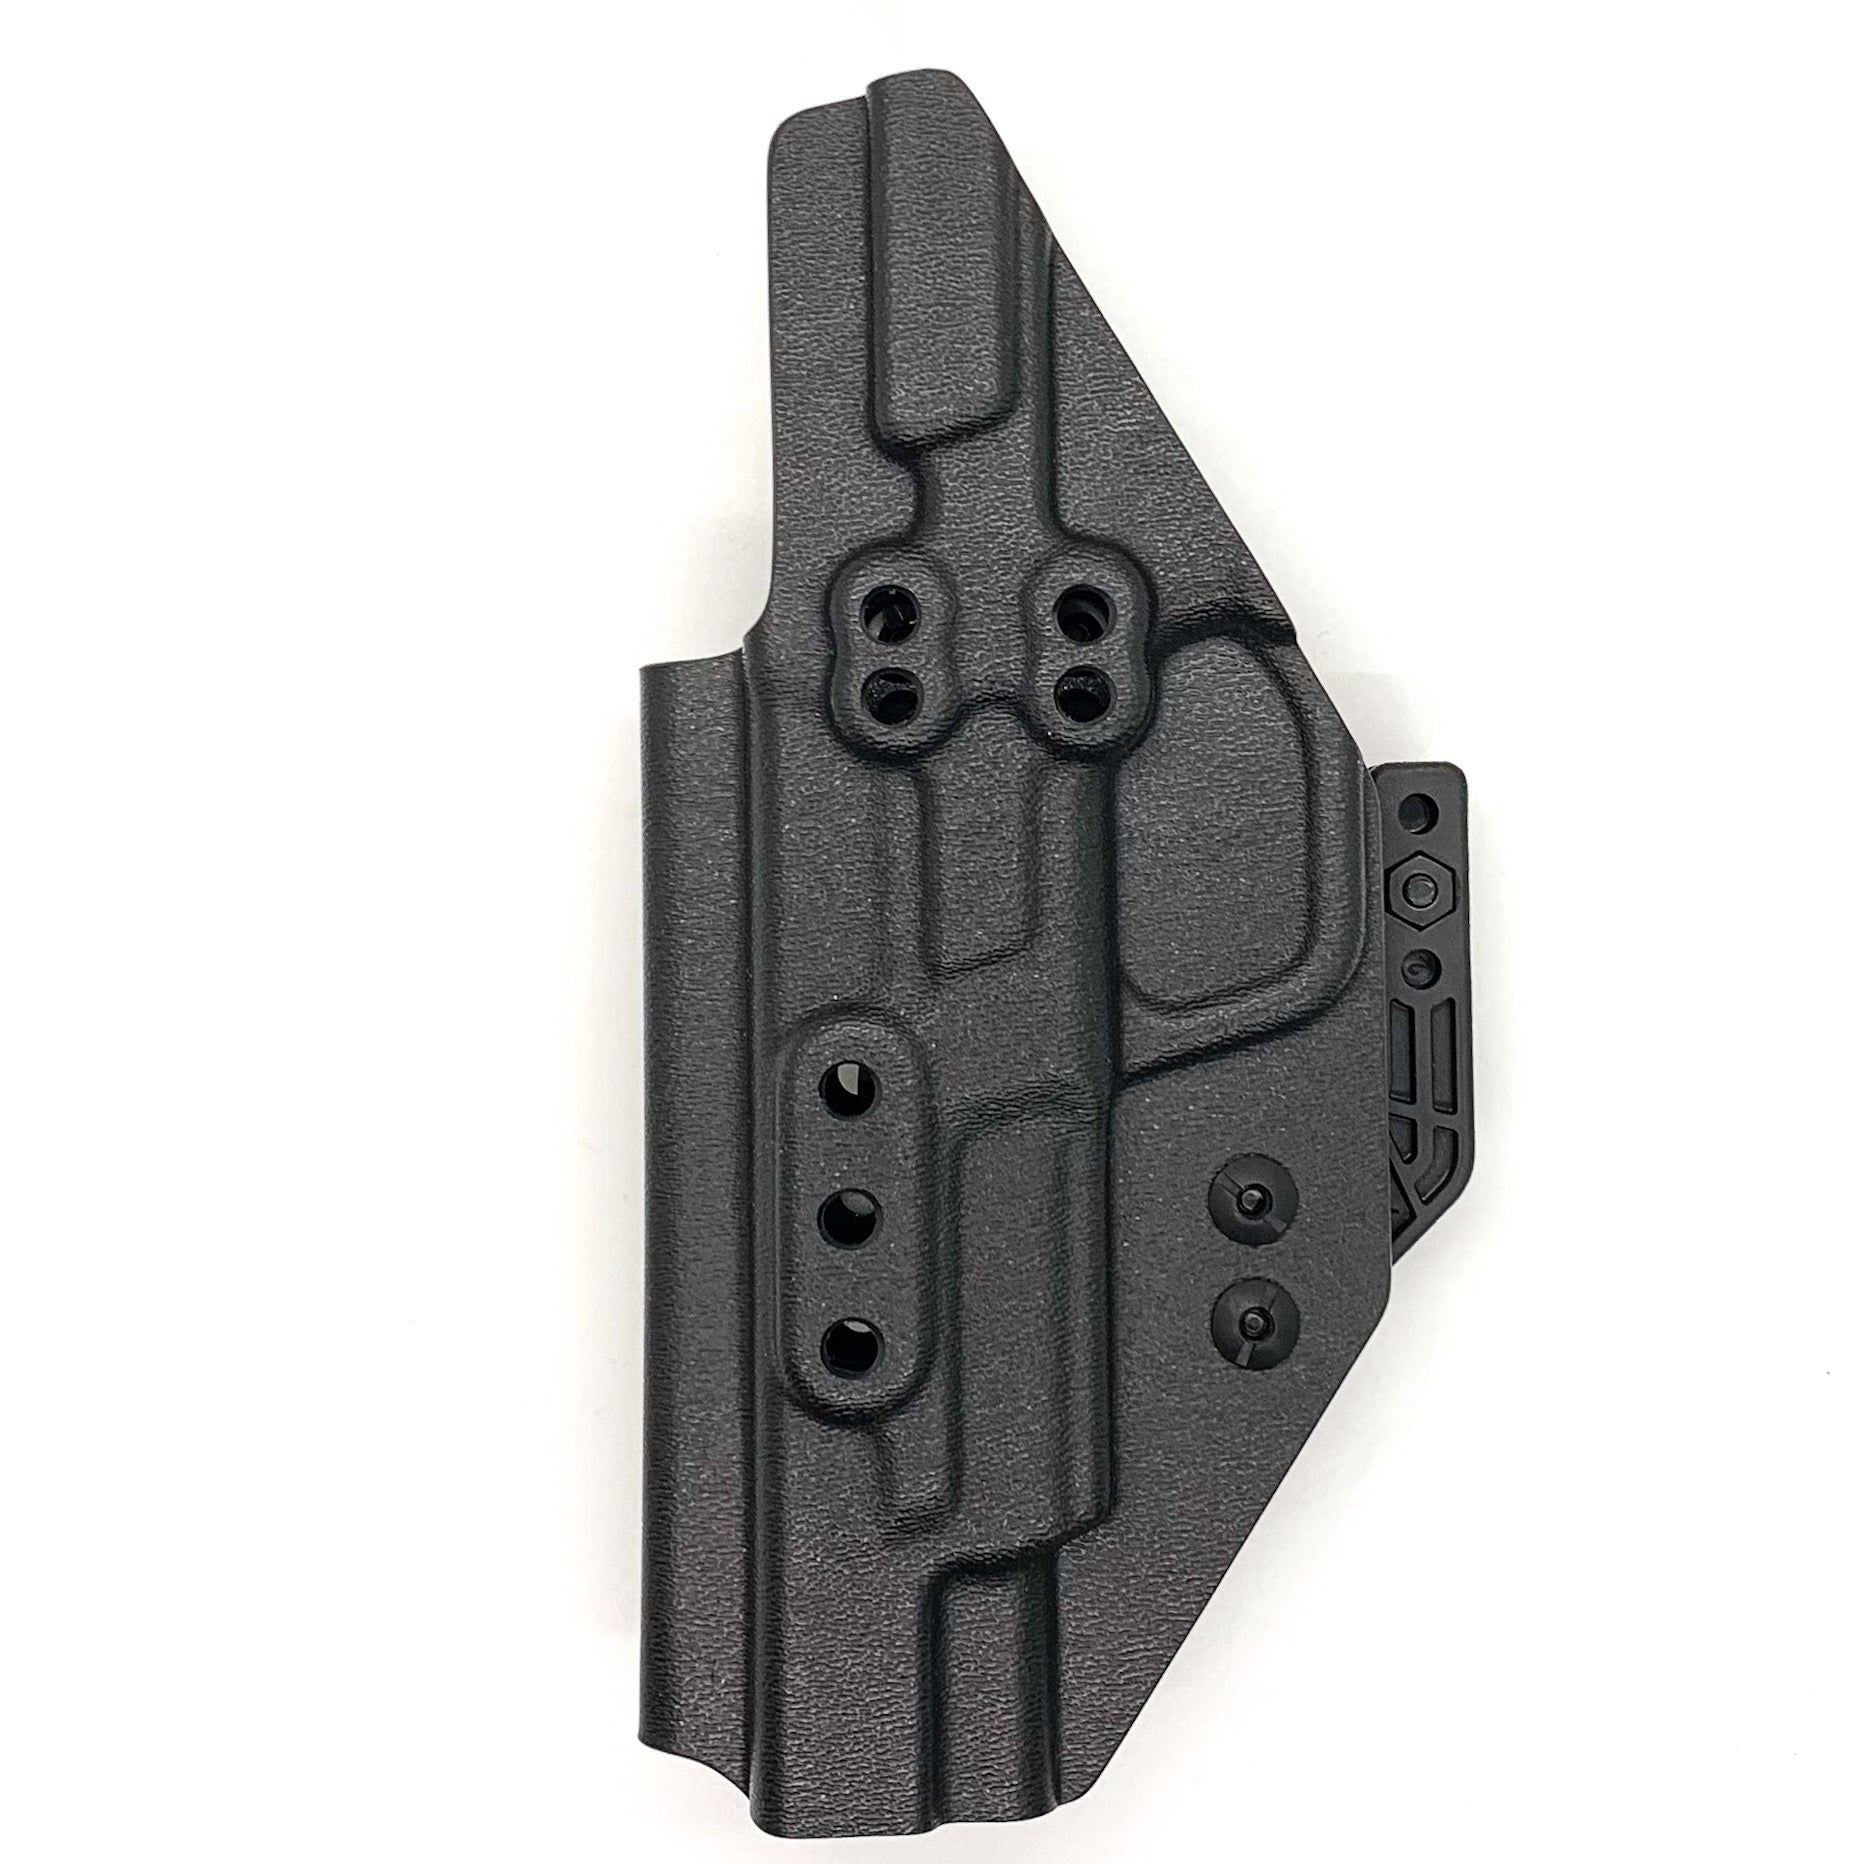 Inside Waistband Kydex Taco Holster designed to fit the Smith and Wesson M&P M2.0 pistol with thumb safety. The holster is designed to fit the 5", 4.25" & 4" barrel lengths.  Full sweat guard, adjustable retention, profiled for a red dot sight. Proudly made in the USA for veterans and law enforcement. 